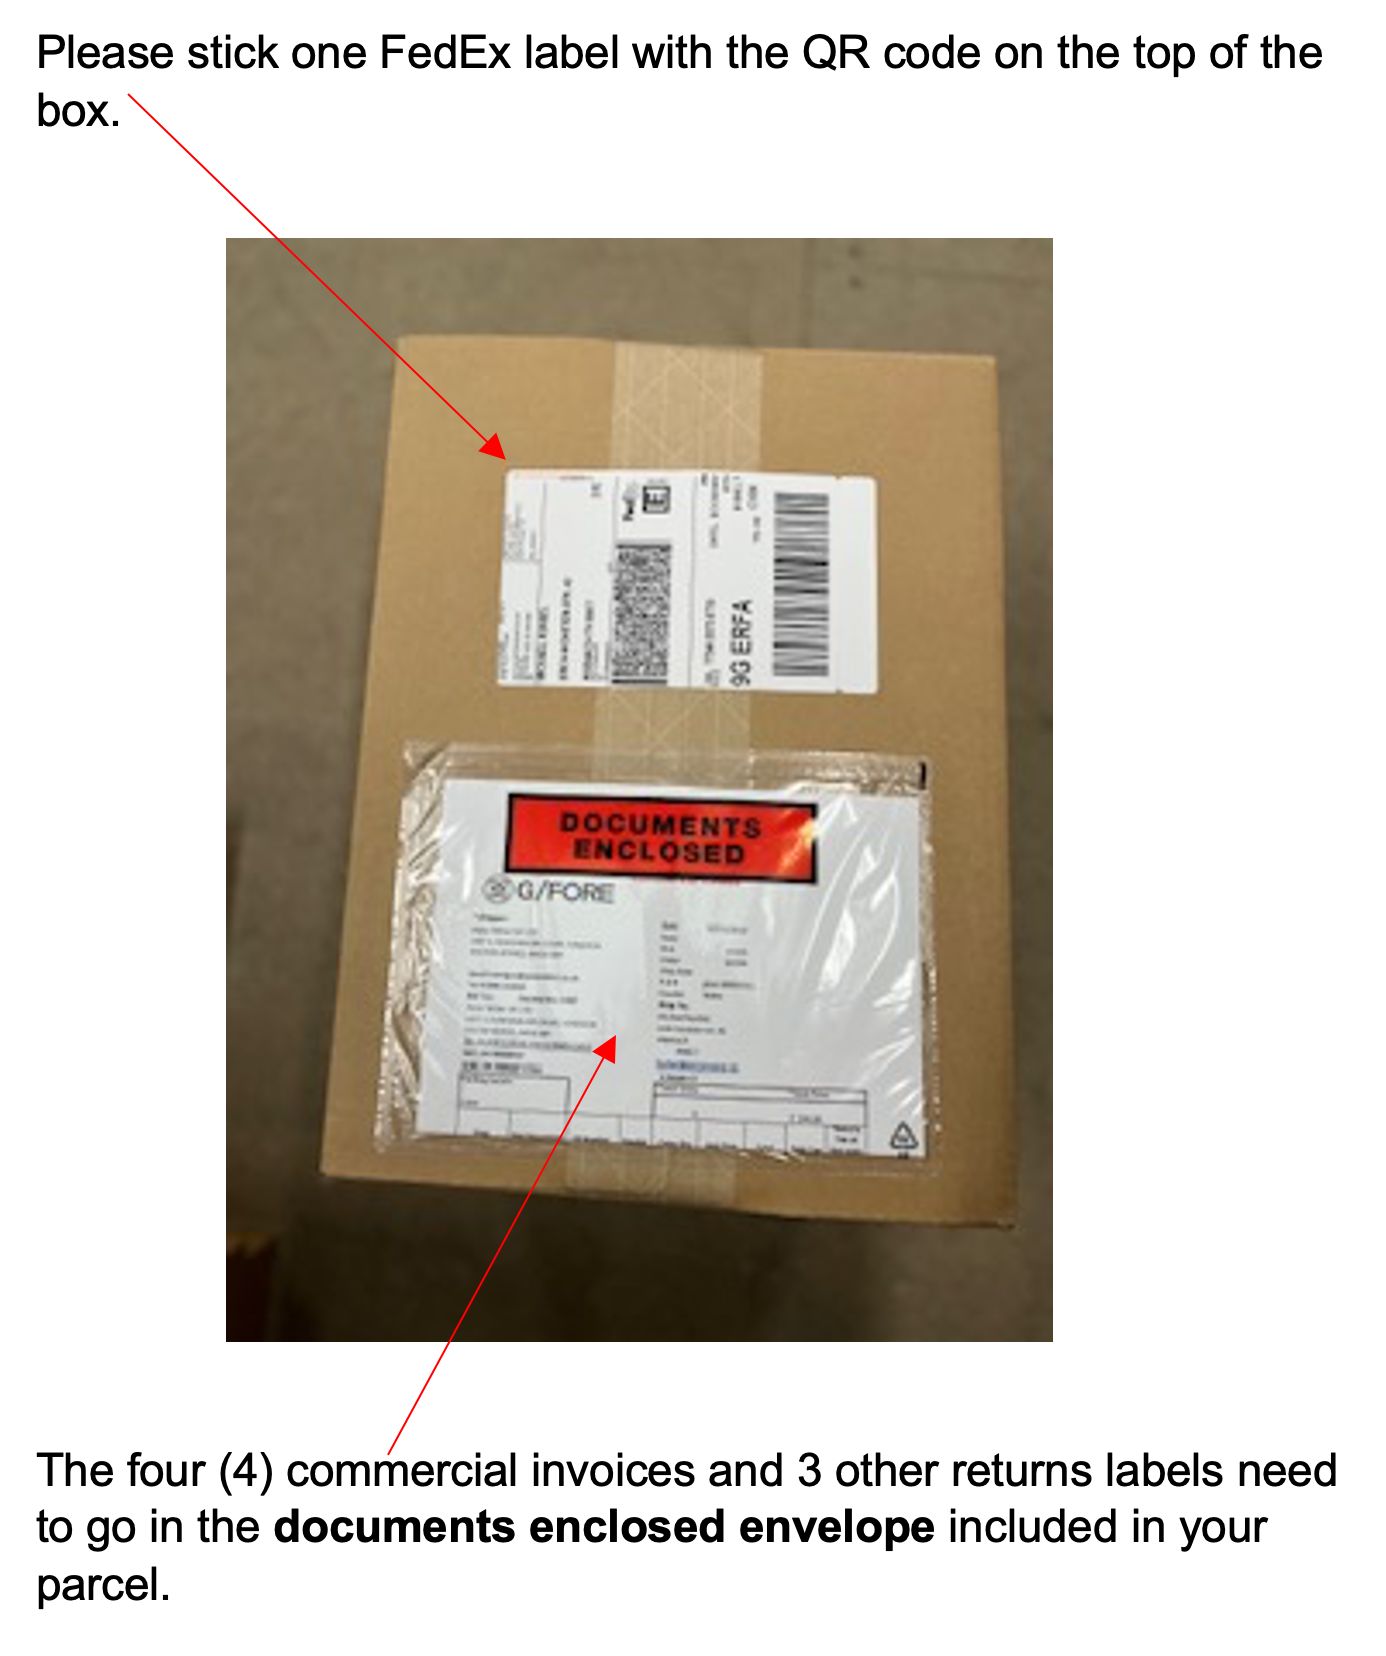 A red arrow pointing to the FedEx label with text that reads: Please stick one FedEx label with the QR code on the top of the box. A second red arrow that points to the Documents enclosed envelope with text that reads: The four (4) commercial invoices and 3 other returns labels need to go in the documents enclosed in your parcel.